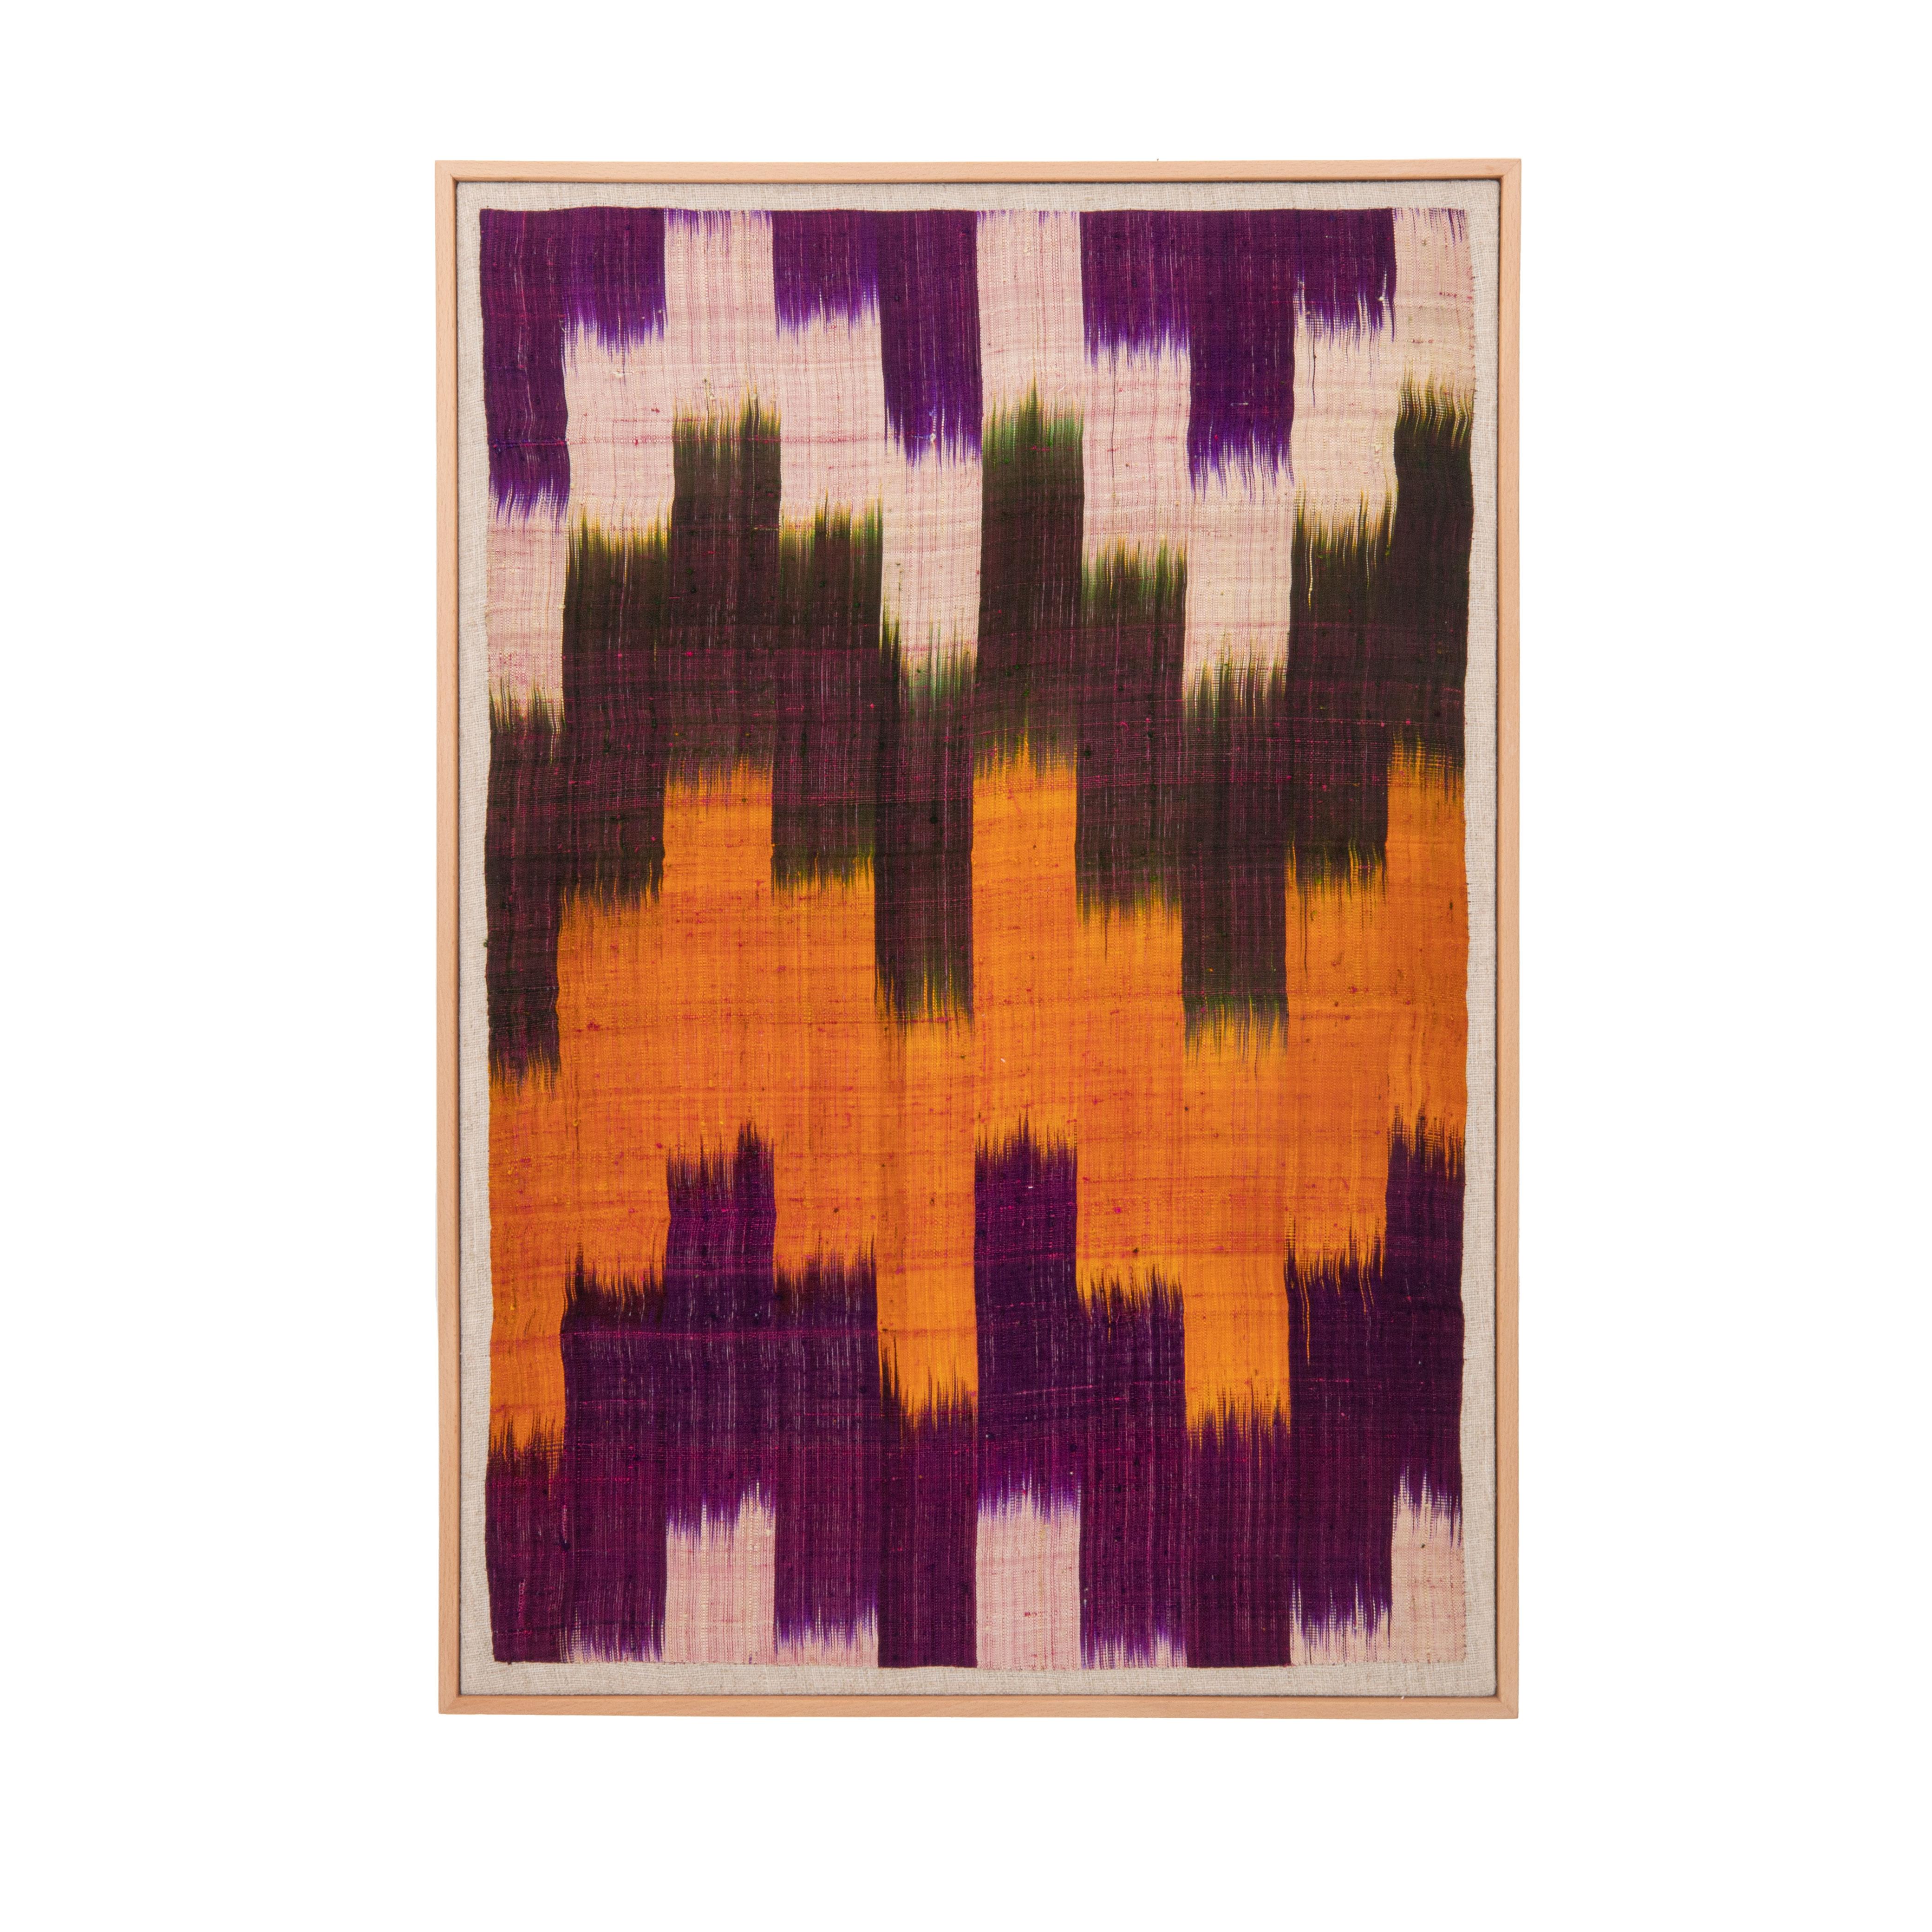 Professionally Framed Ikat Fragment, Uzbekistan, Early 20th C.
It has been hand backed on linen and stretched over a stretcher , and finished with the wooden frame.
Ready to go on any Wall.

